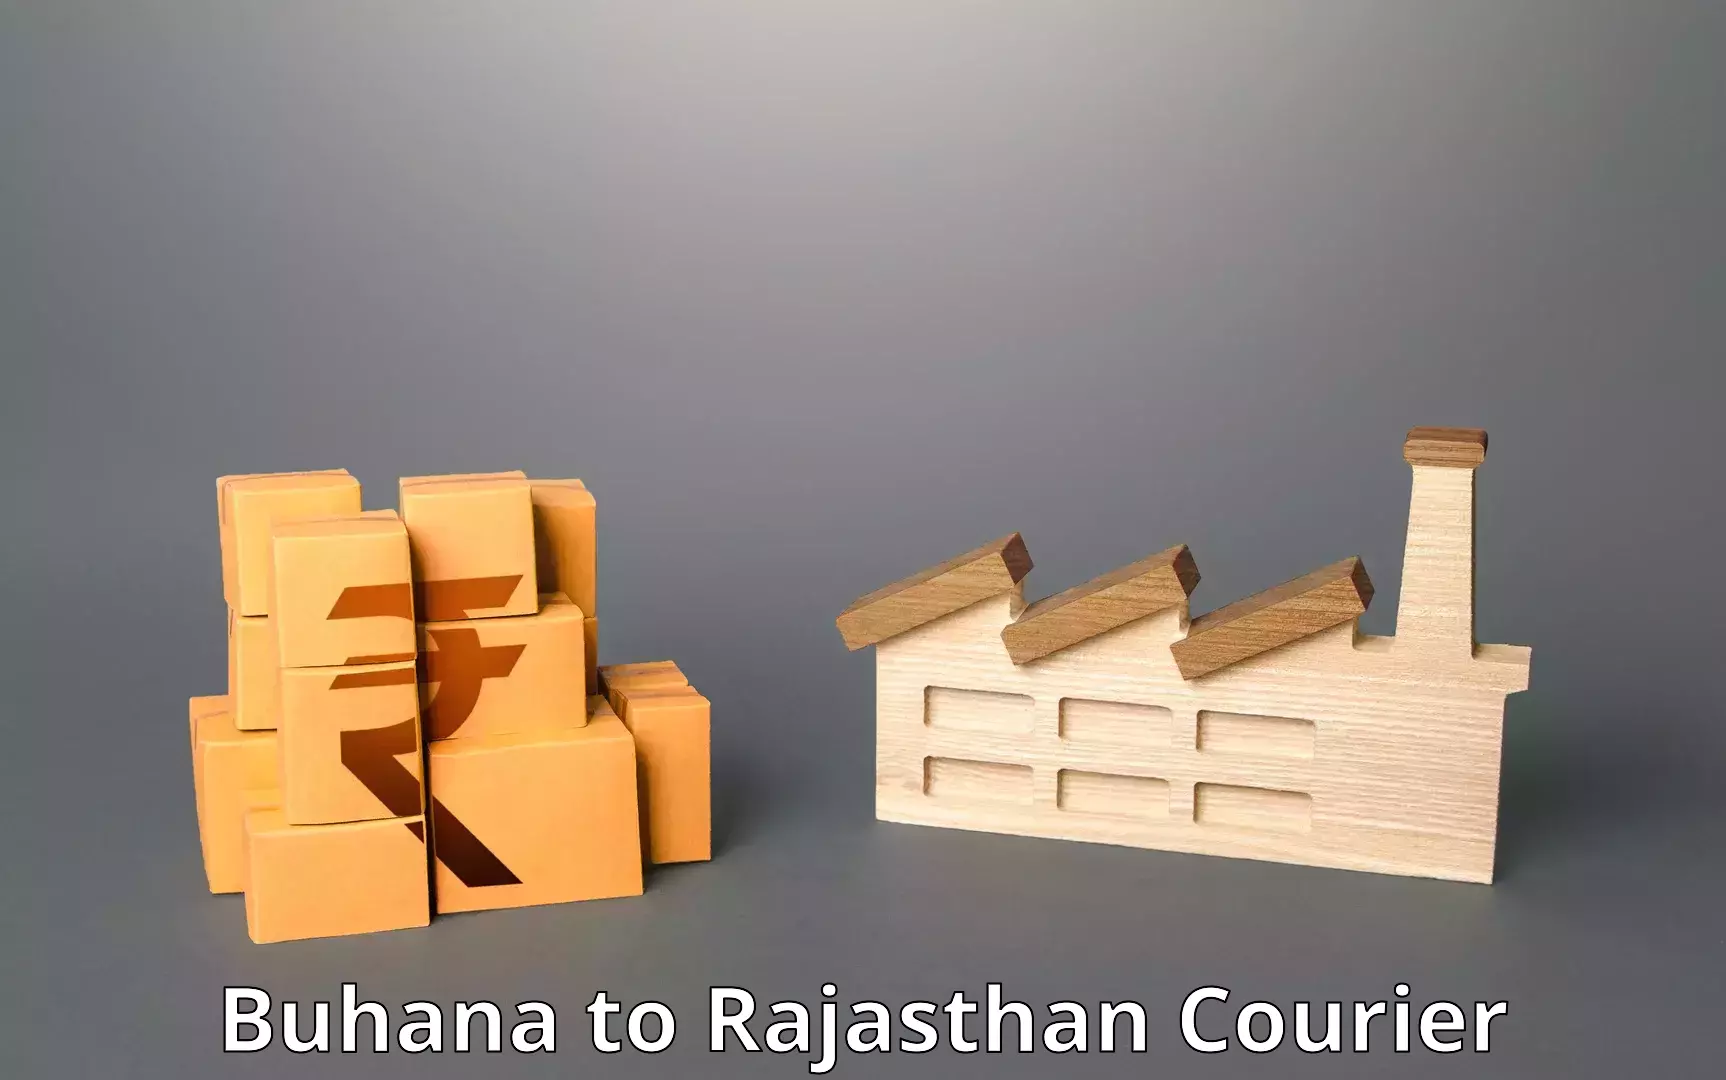 Modern courier technology Buhana to Rajasthan